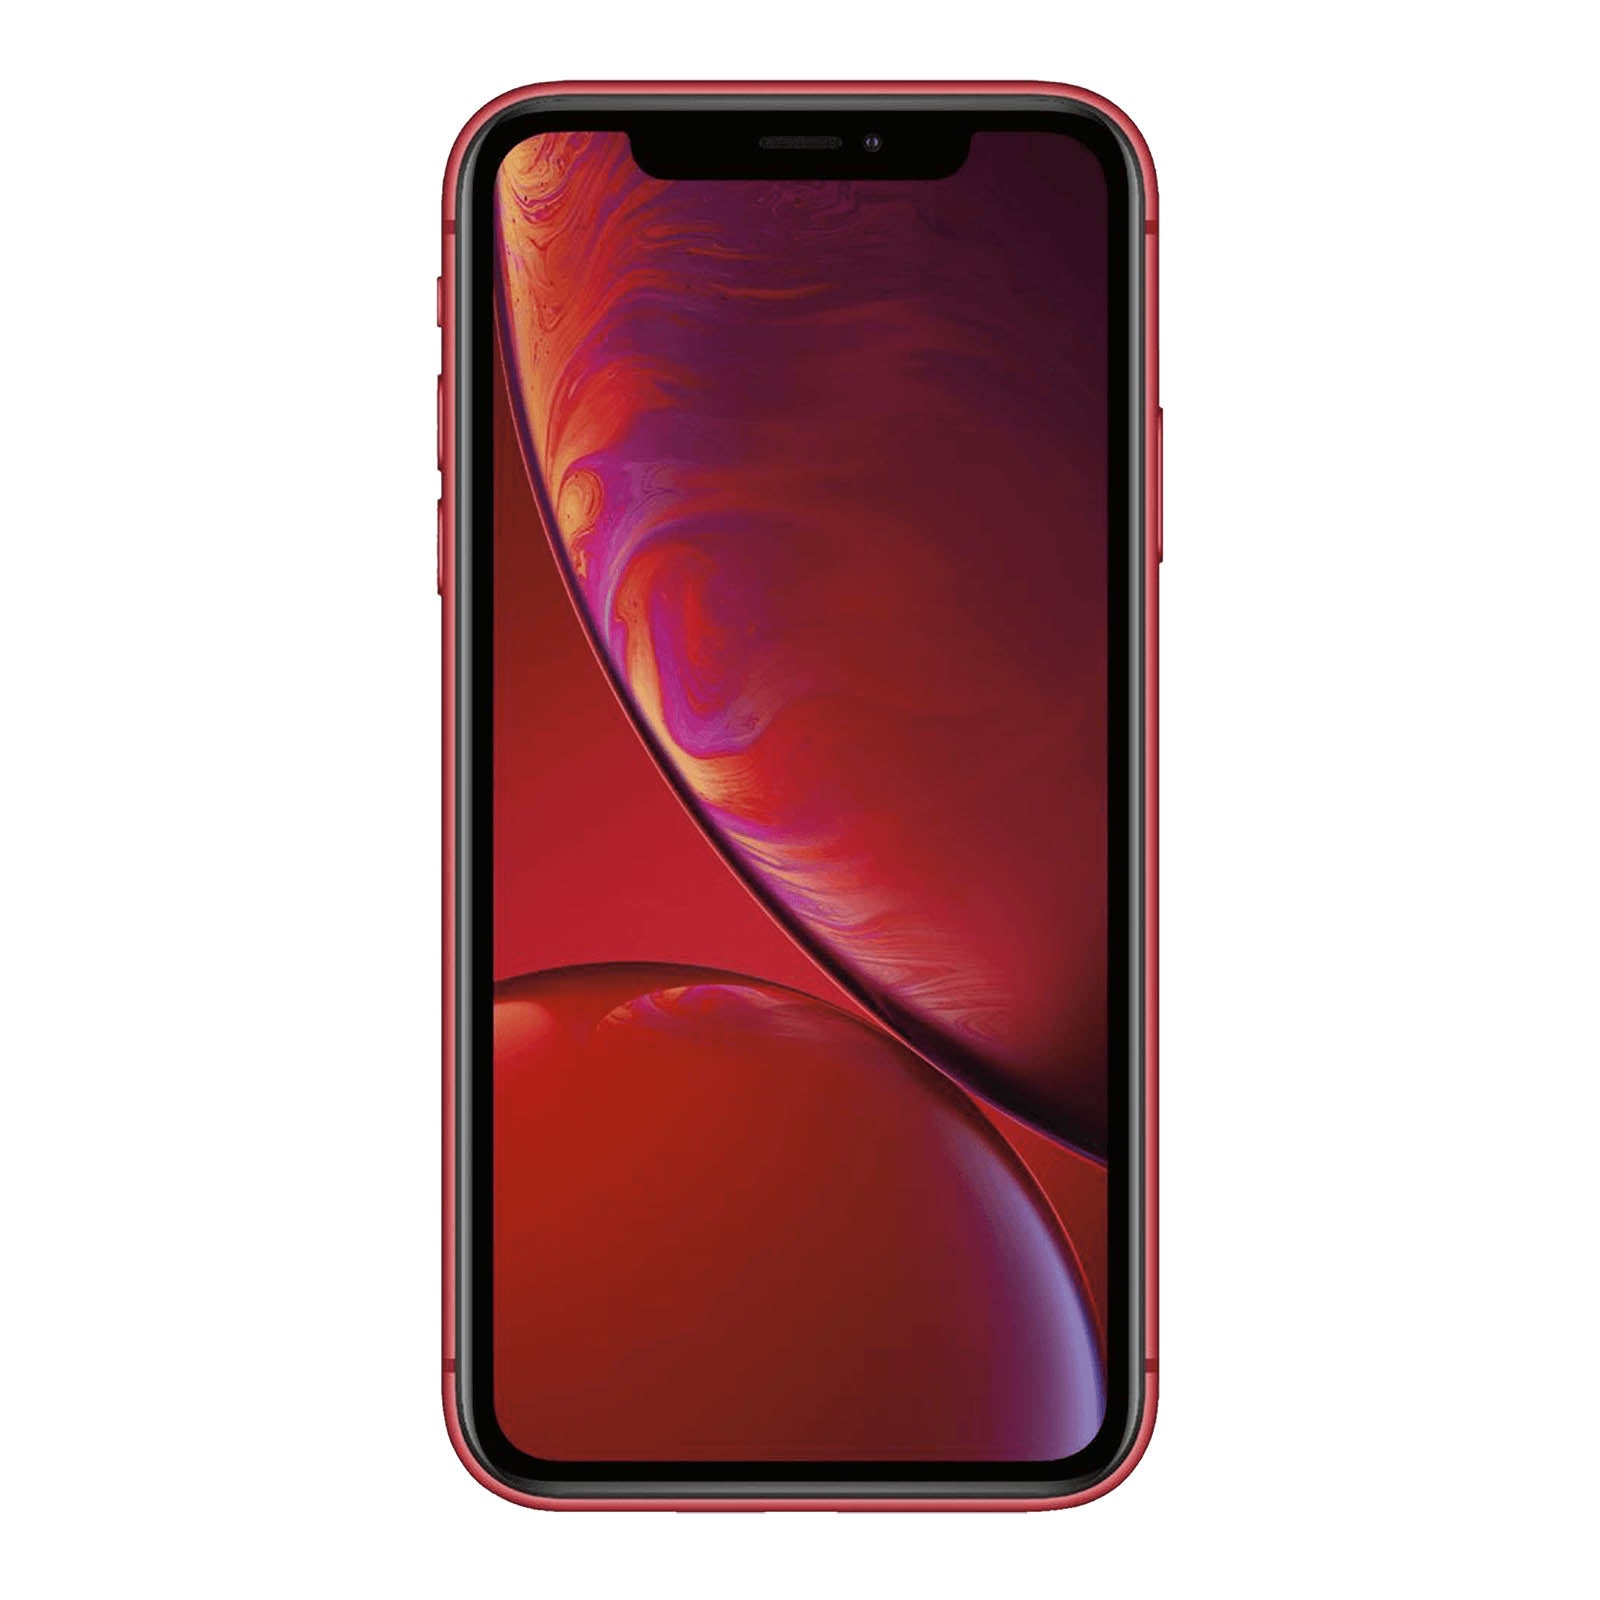 Apple iPhone XR 256GB Product Red Very Good - Sprint